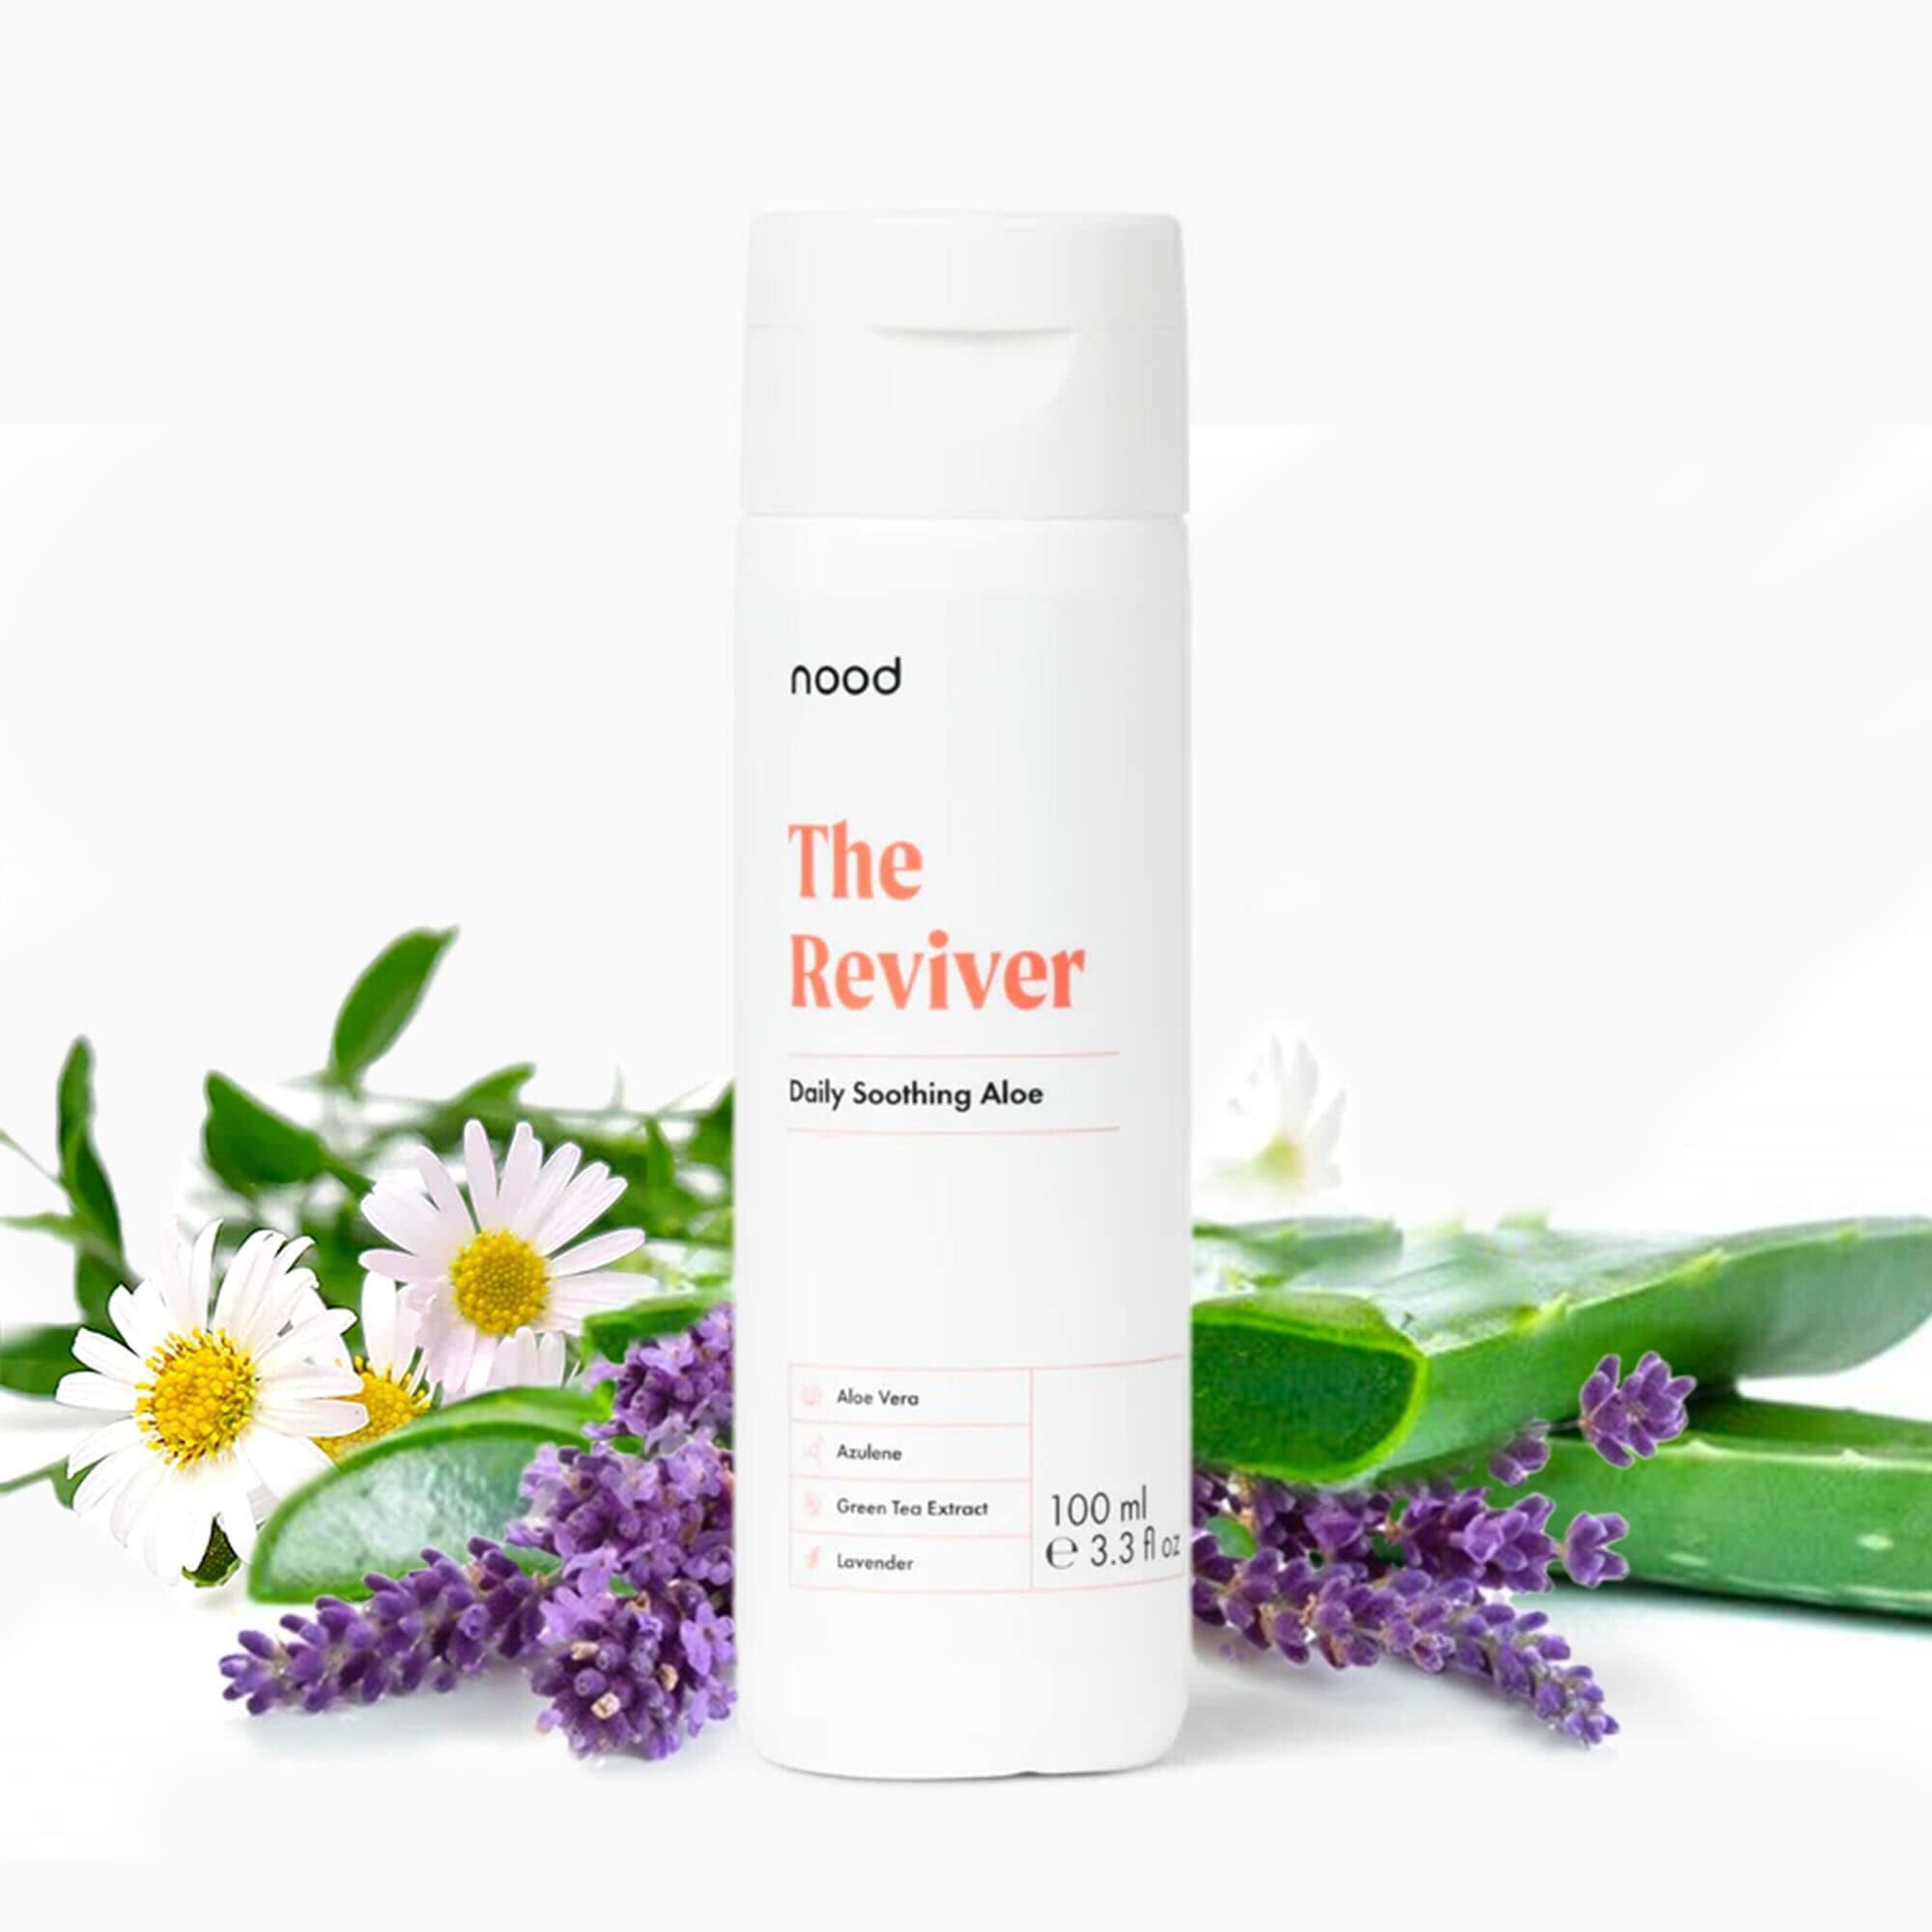 The Reviver by Nood, Aloe Vera and Azulene Gel, Soothes Skin After IPL Laser  Hair Removal Treatment, Lavender and Green Tea Extracts, Reduces Irritation  due to Sunburn, Chemical Peels, and I -